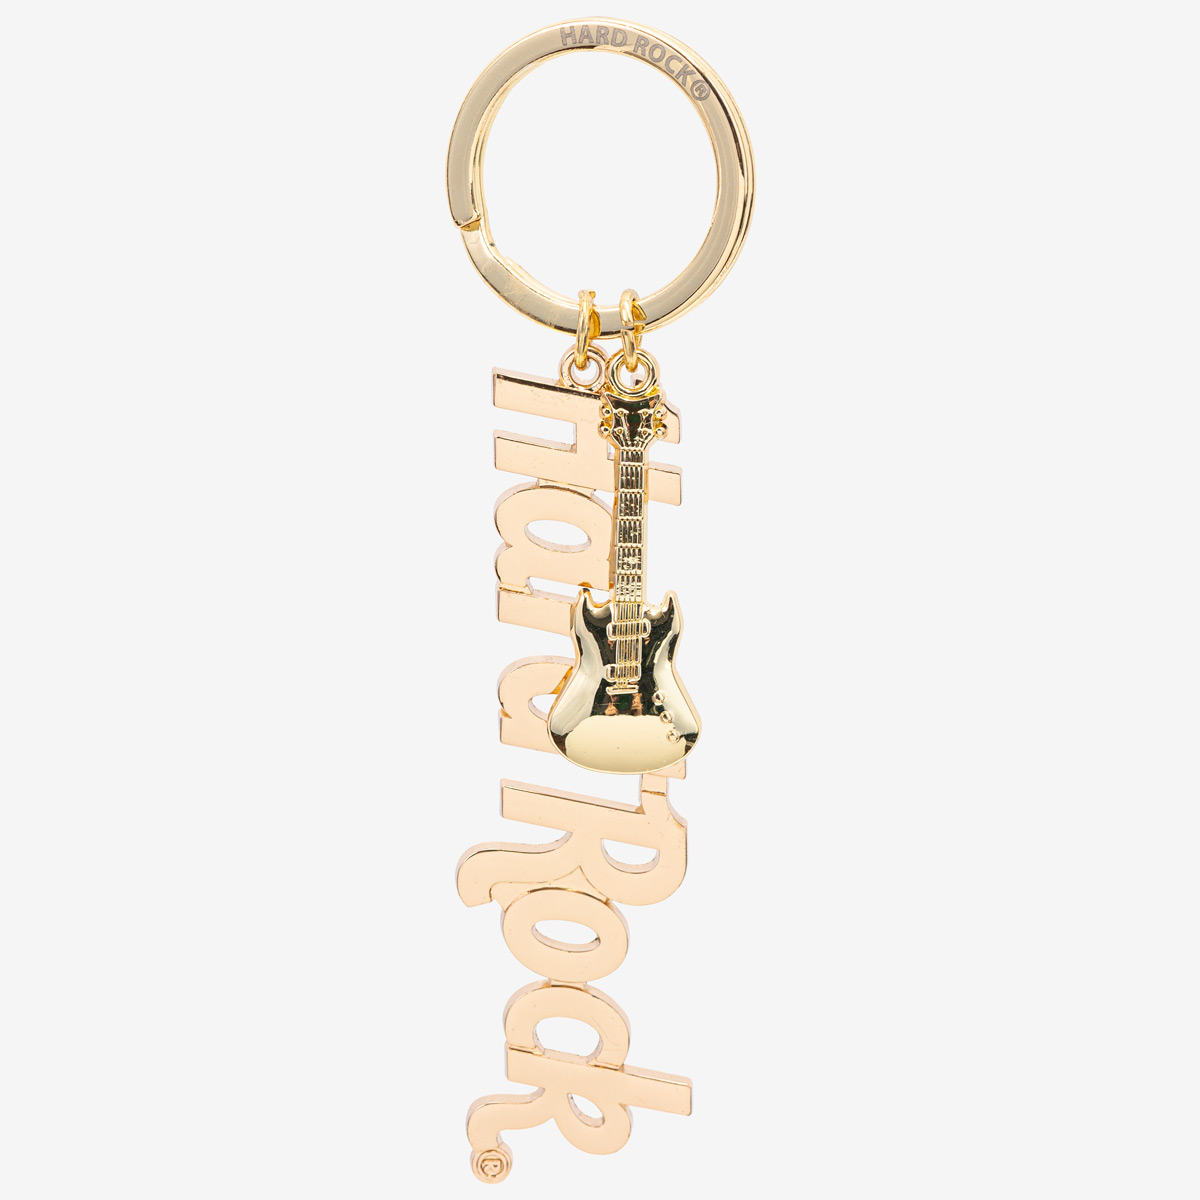 Hard Rock Gold Overlay Keychain with a 3D Guitar Charm image number 1